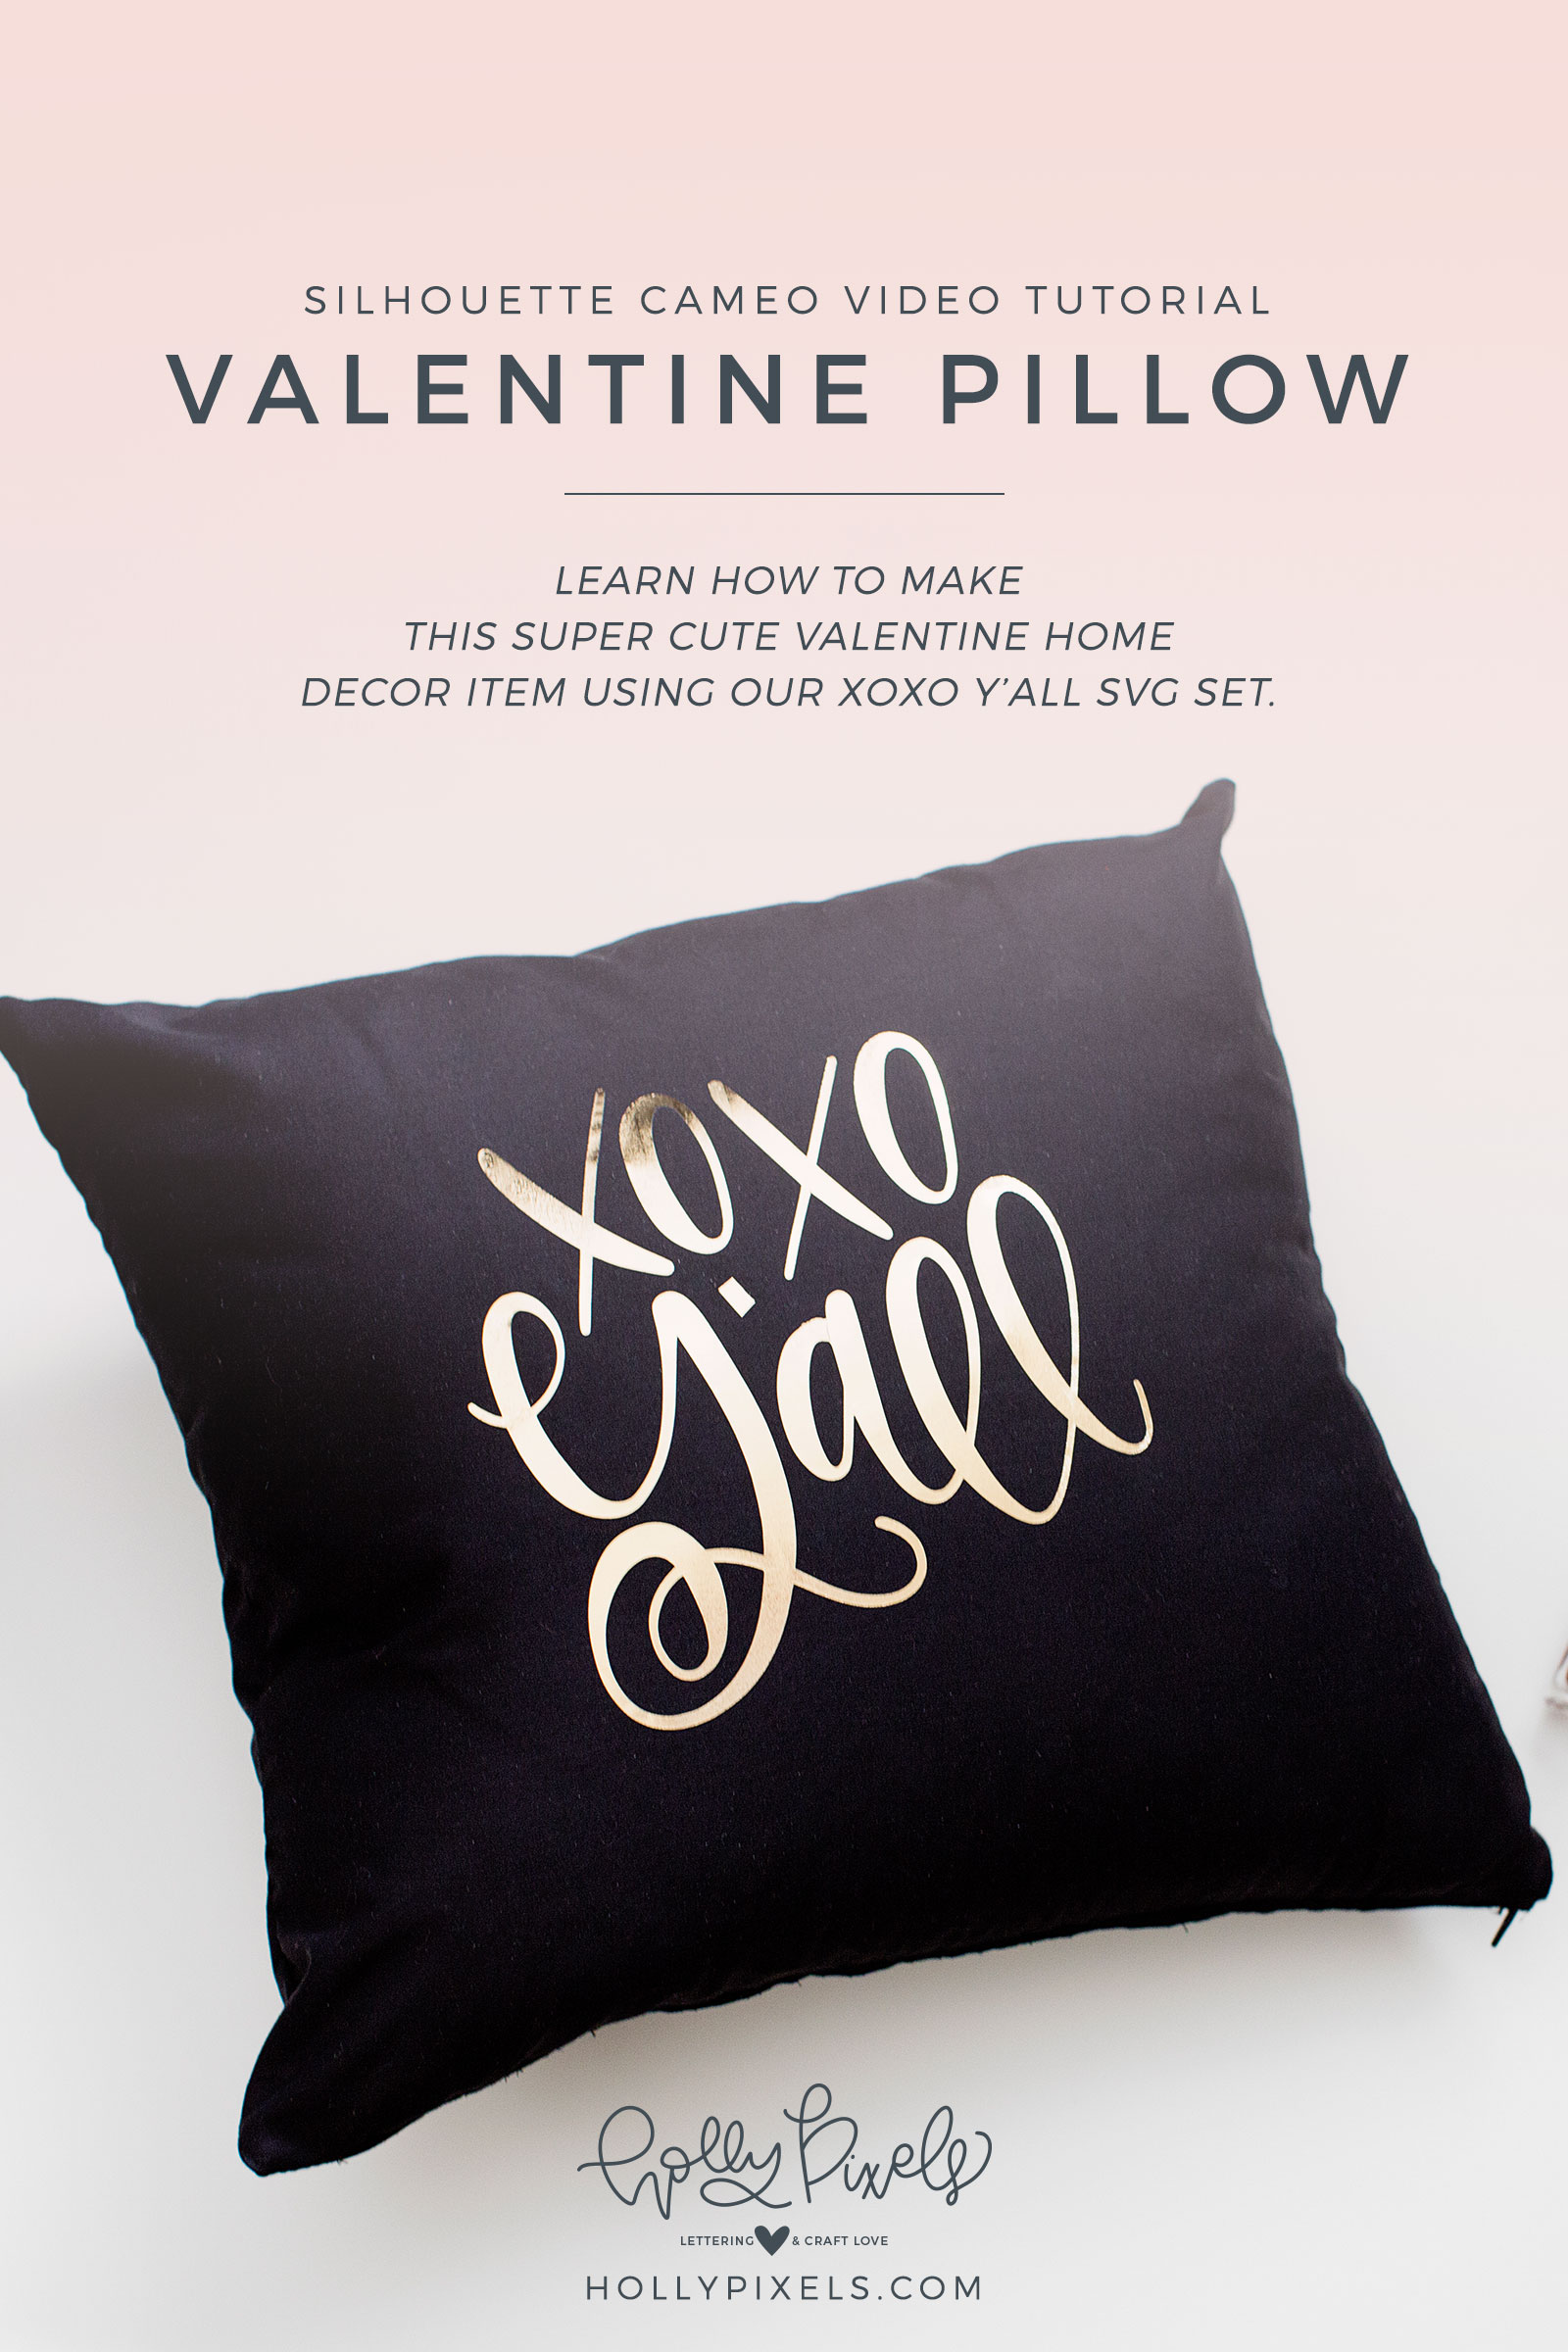 Pillow svg #6, Download drawings